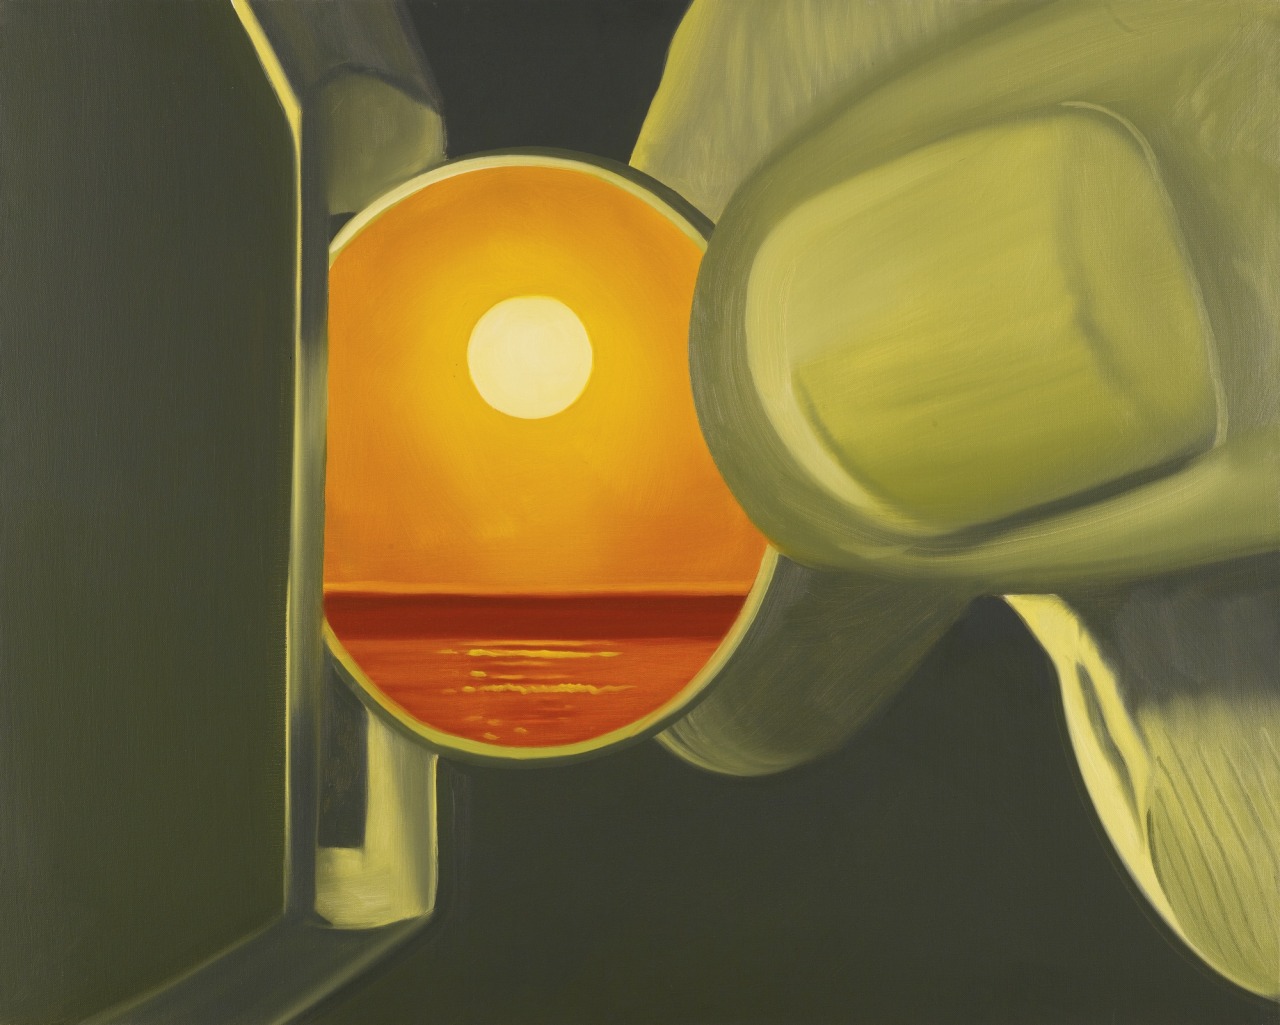 thunderstruck9:
“James Rosenquist (American, b. 1933-2017), Beach Call, 1979. Oil on canvas on board, 24 x 30 1/8 in.
”